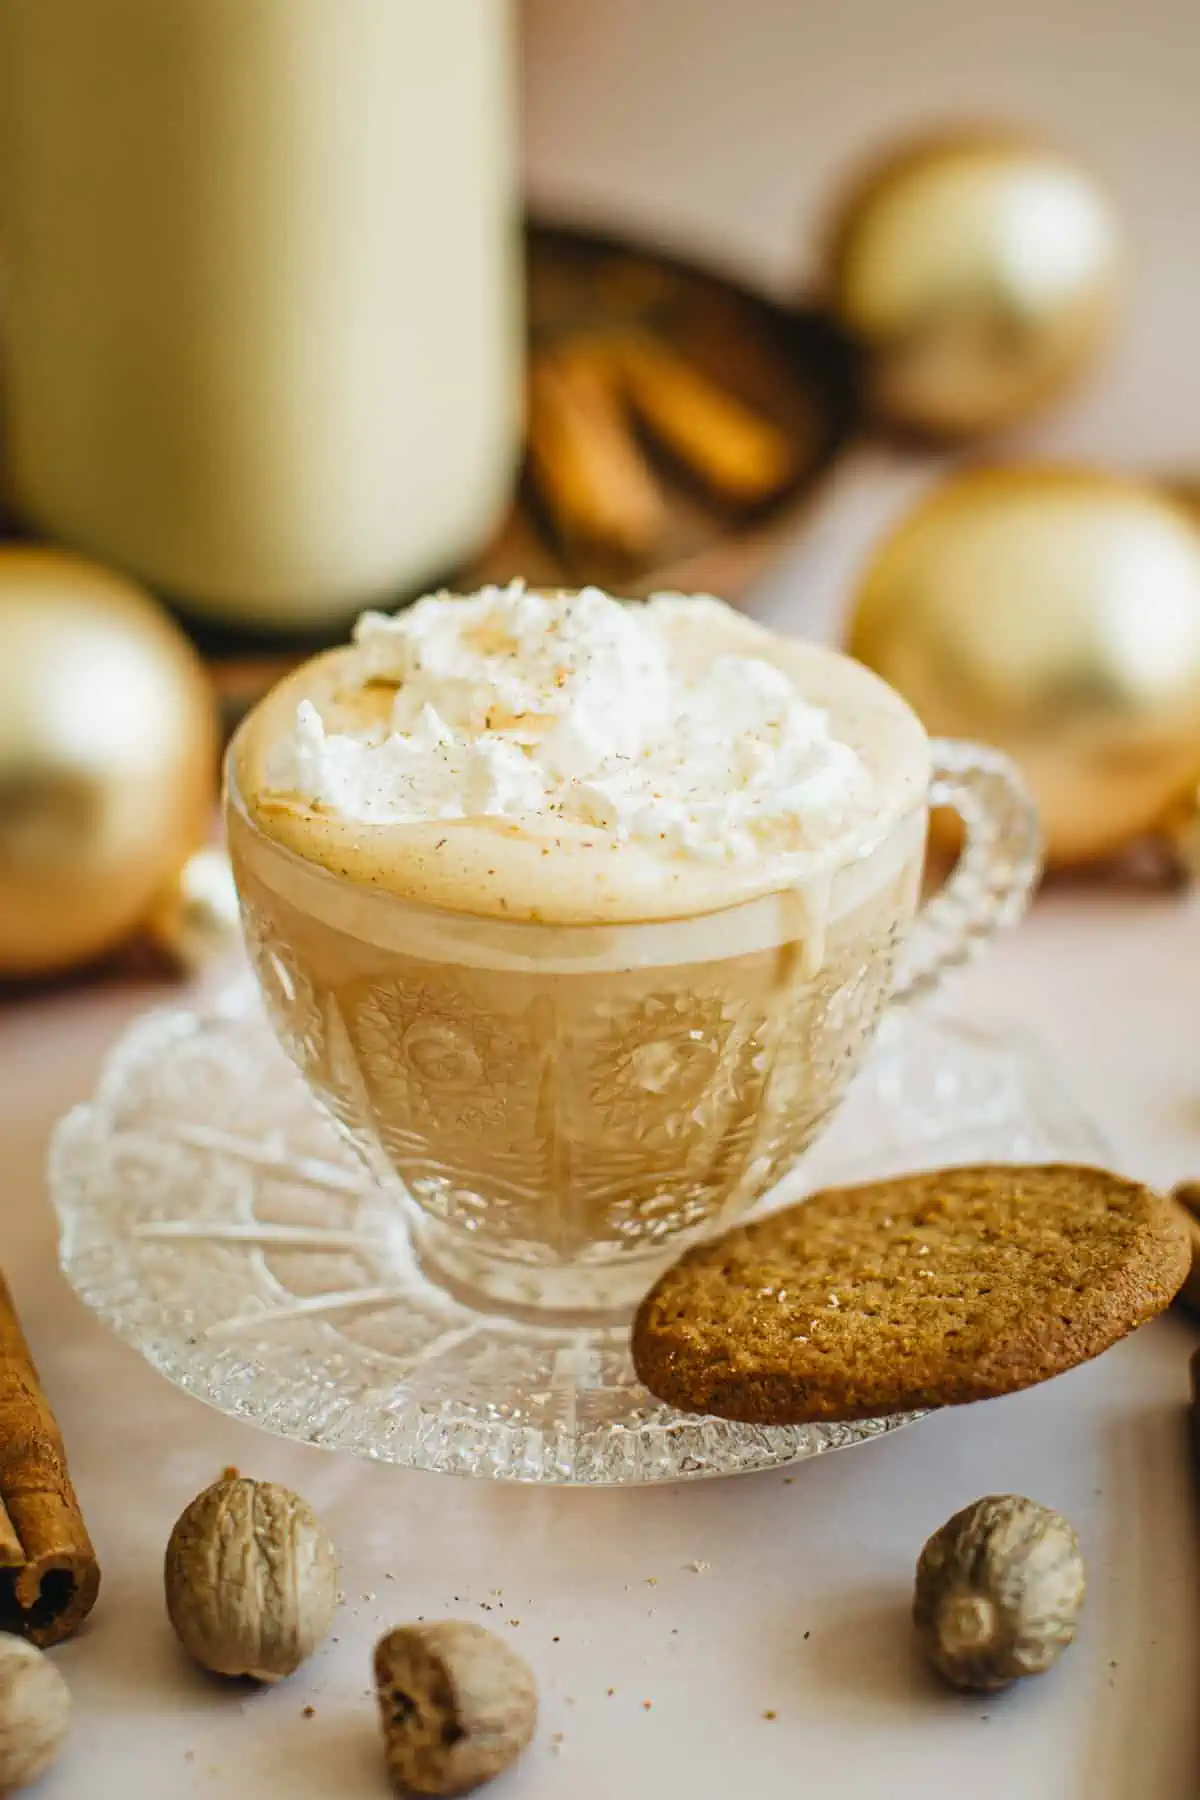 Eggnog Latte in a glass cup with a saucer. The latte is topped with whipped cream and nutmeg.